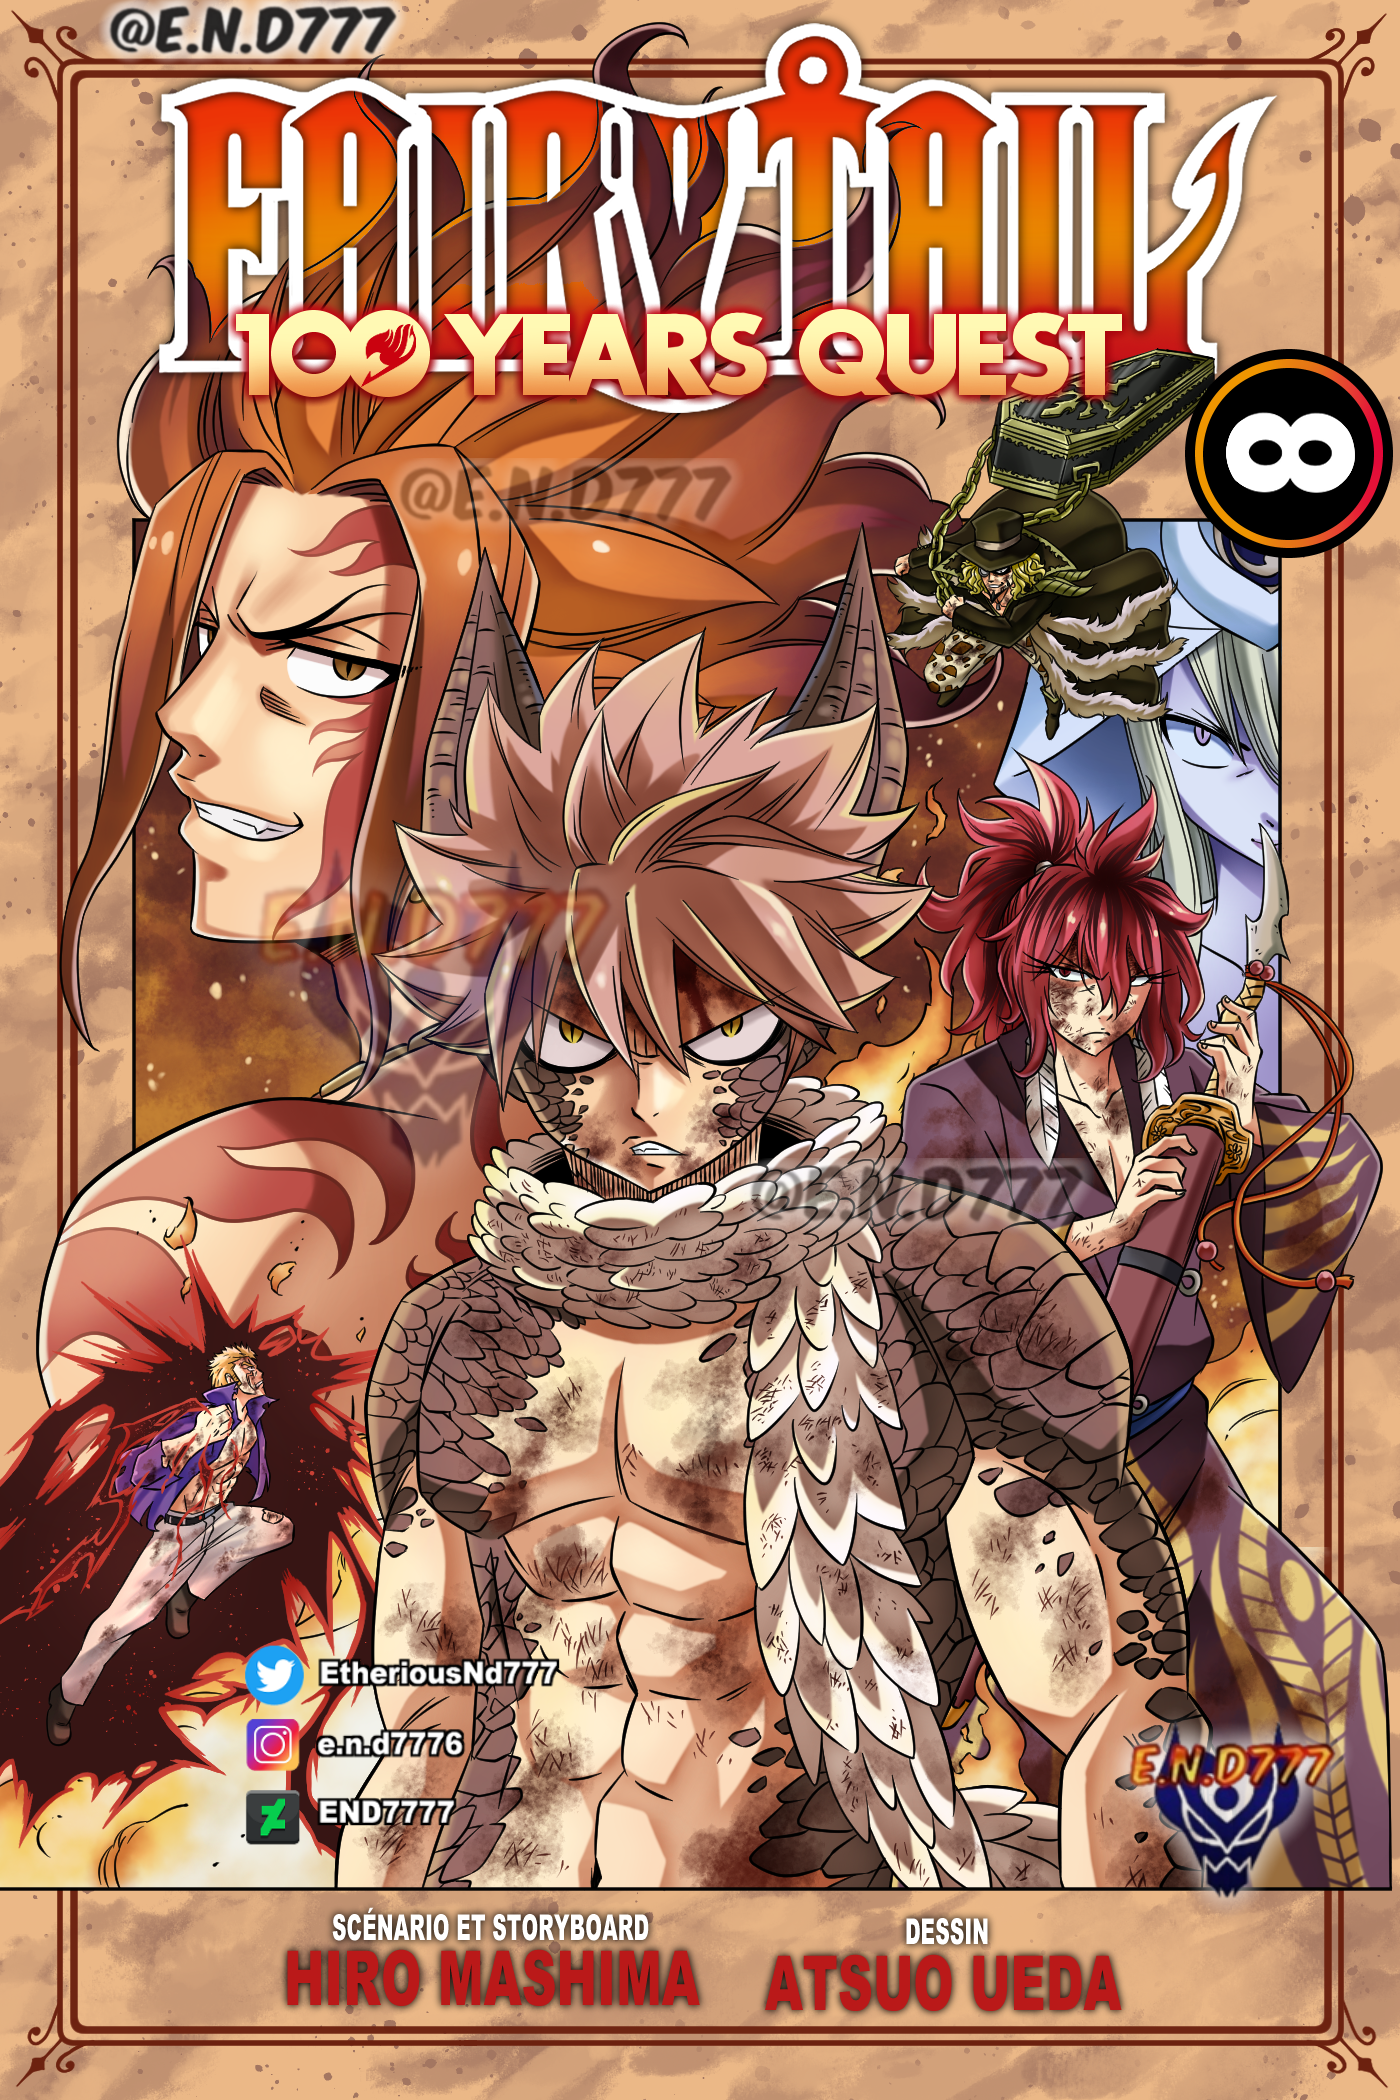 Fairy Tail 100 Years Quest Volume Cover by END7777 on DeviantArt